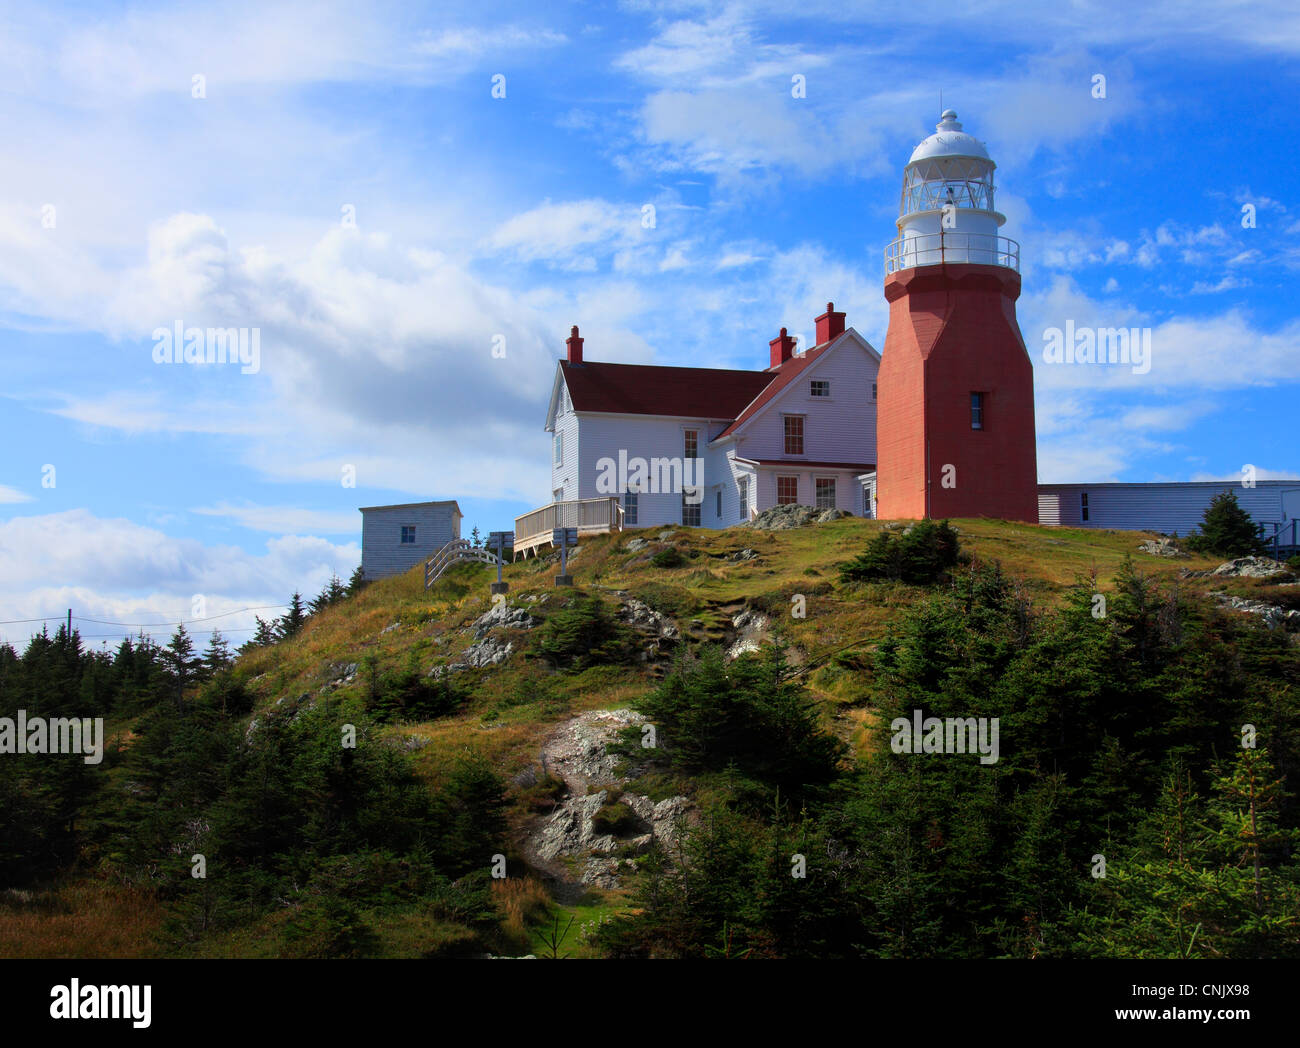 Photo of the Long Point Lighthouse, located on Devil's Cove Head, North Twillingate Island, Newfoundland, Canada Stock Photo